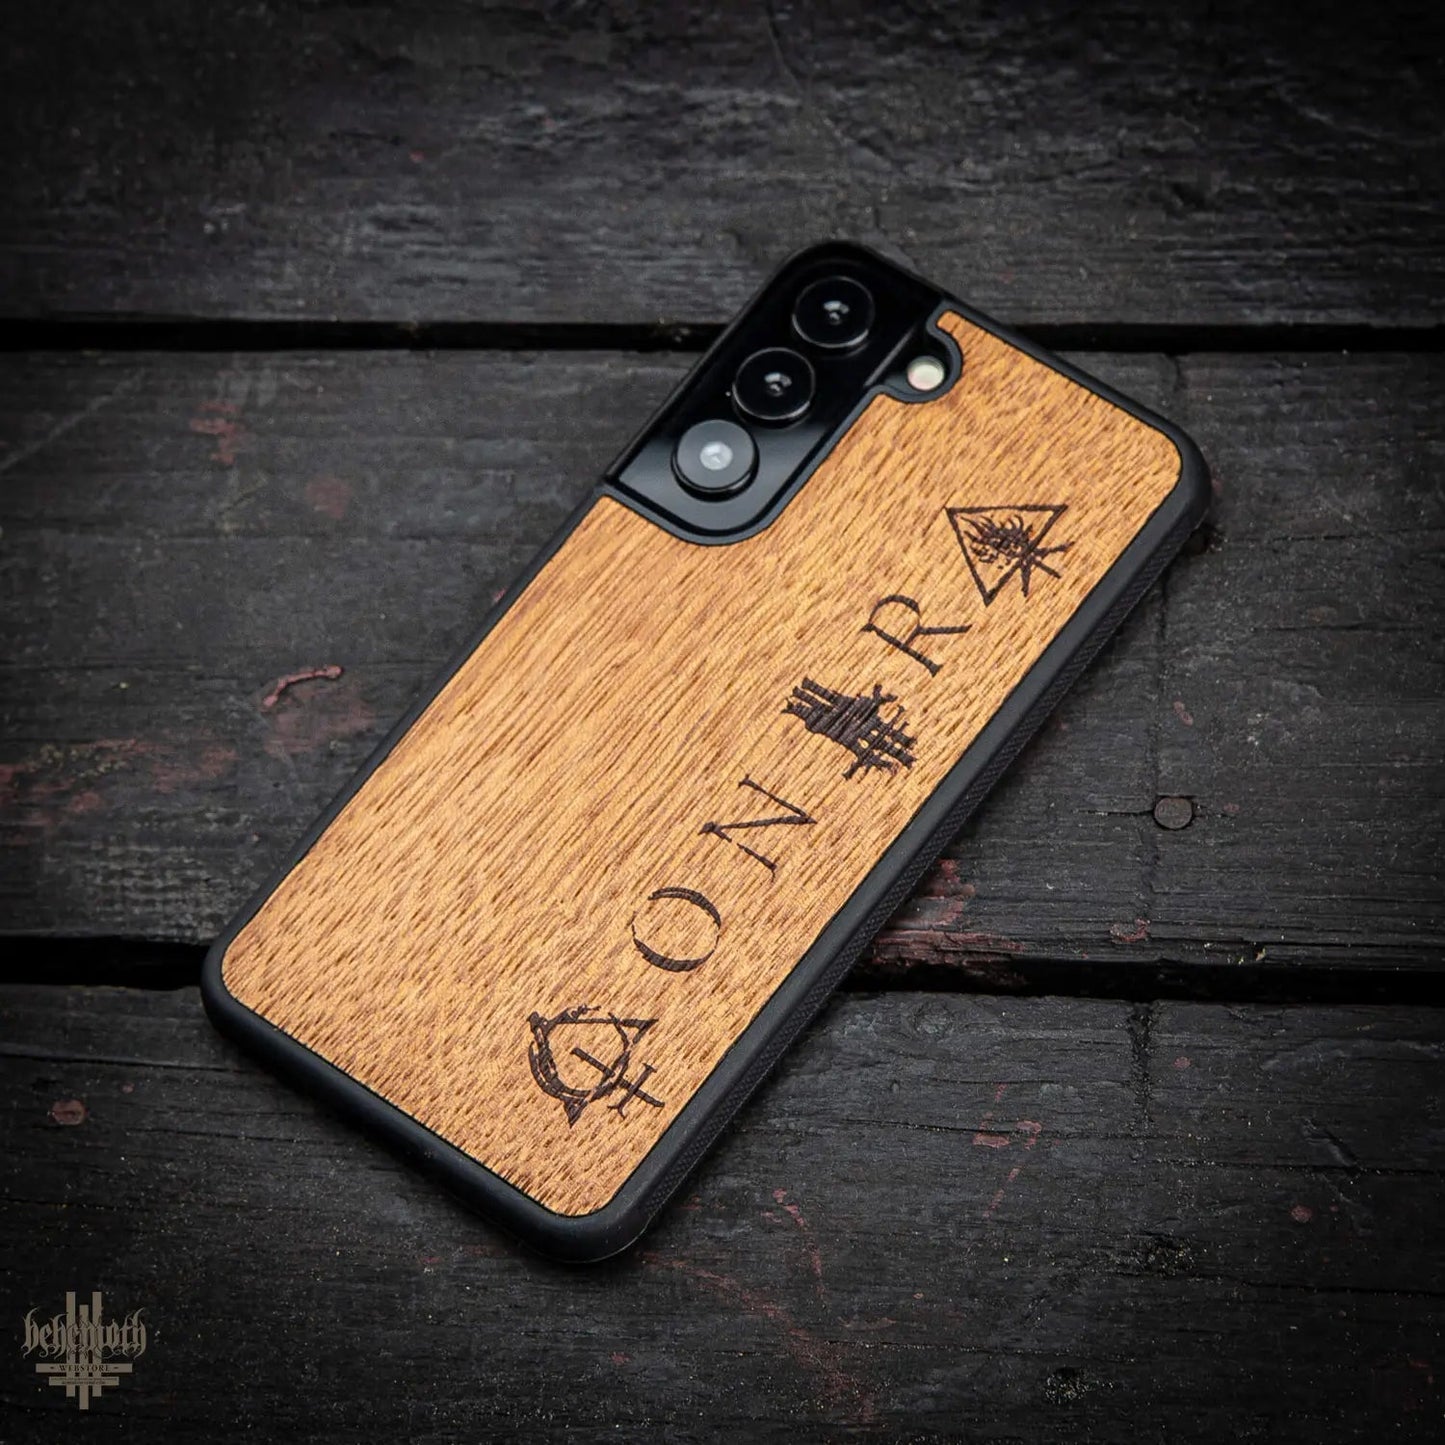 Samsung Galaxy S22 case with wood finishing and Behemoth 'CONTRA' logo